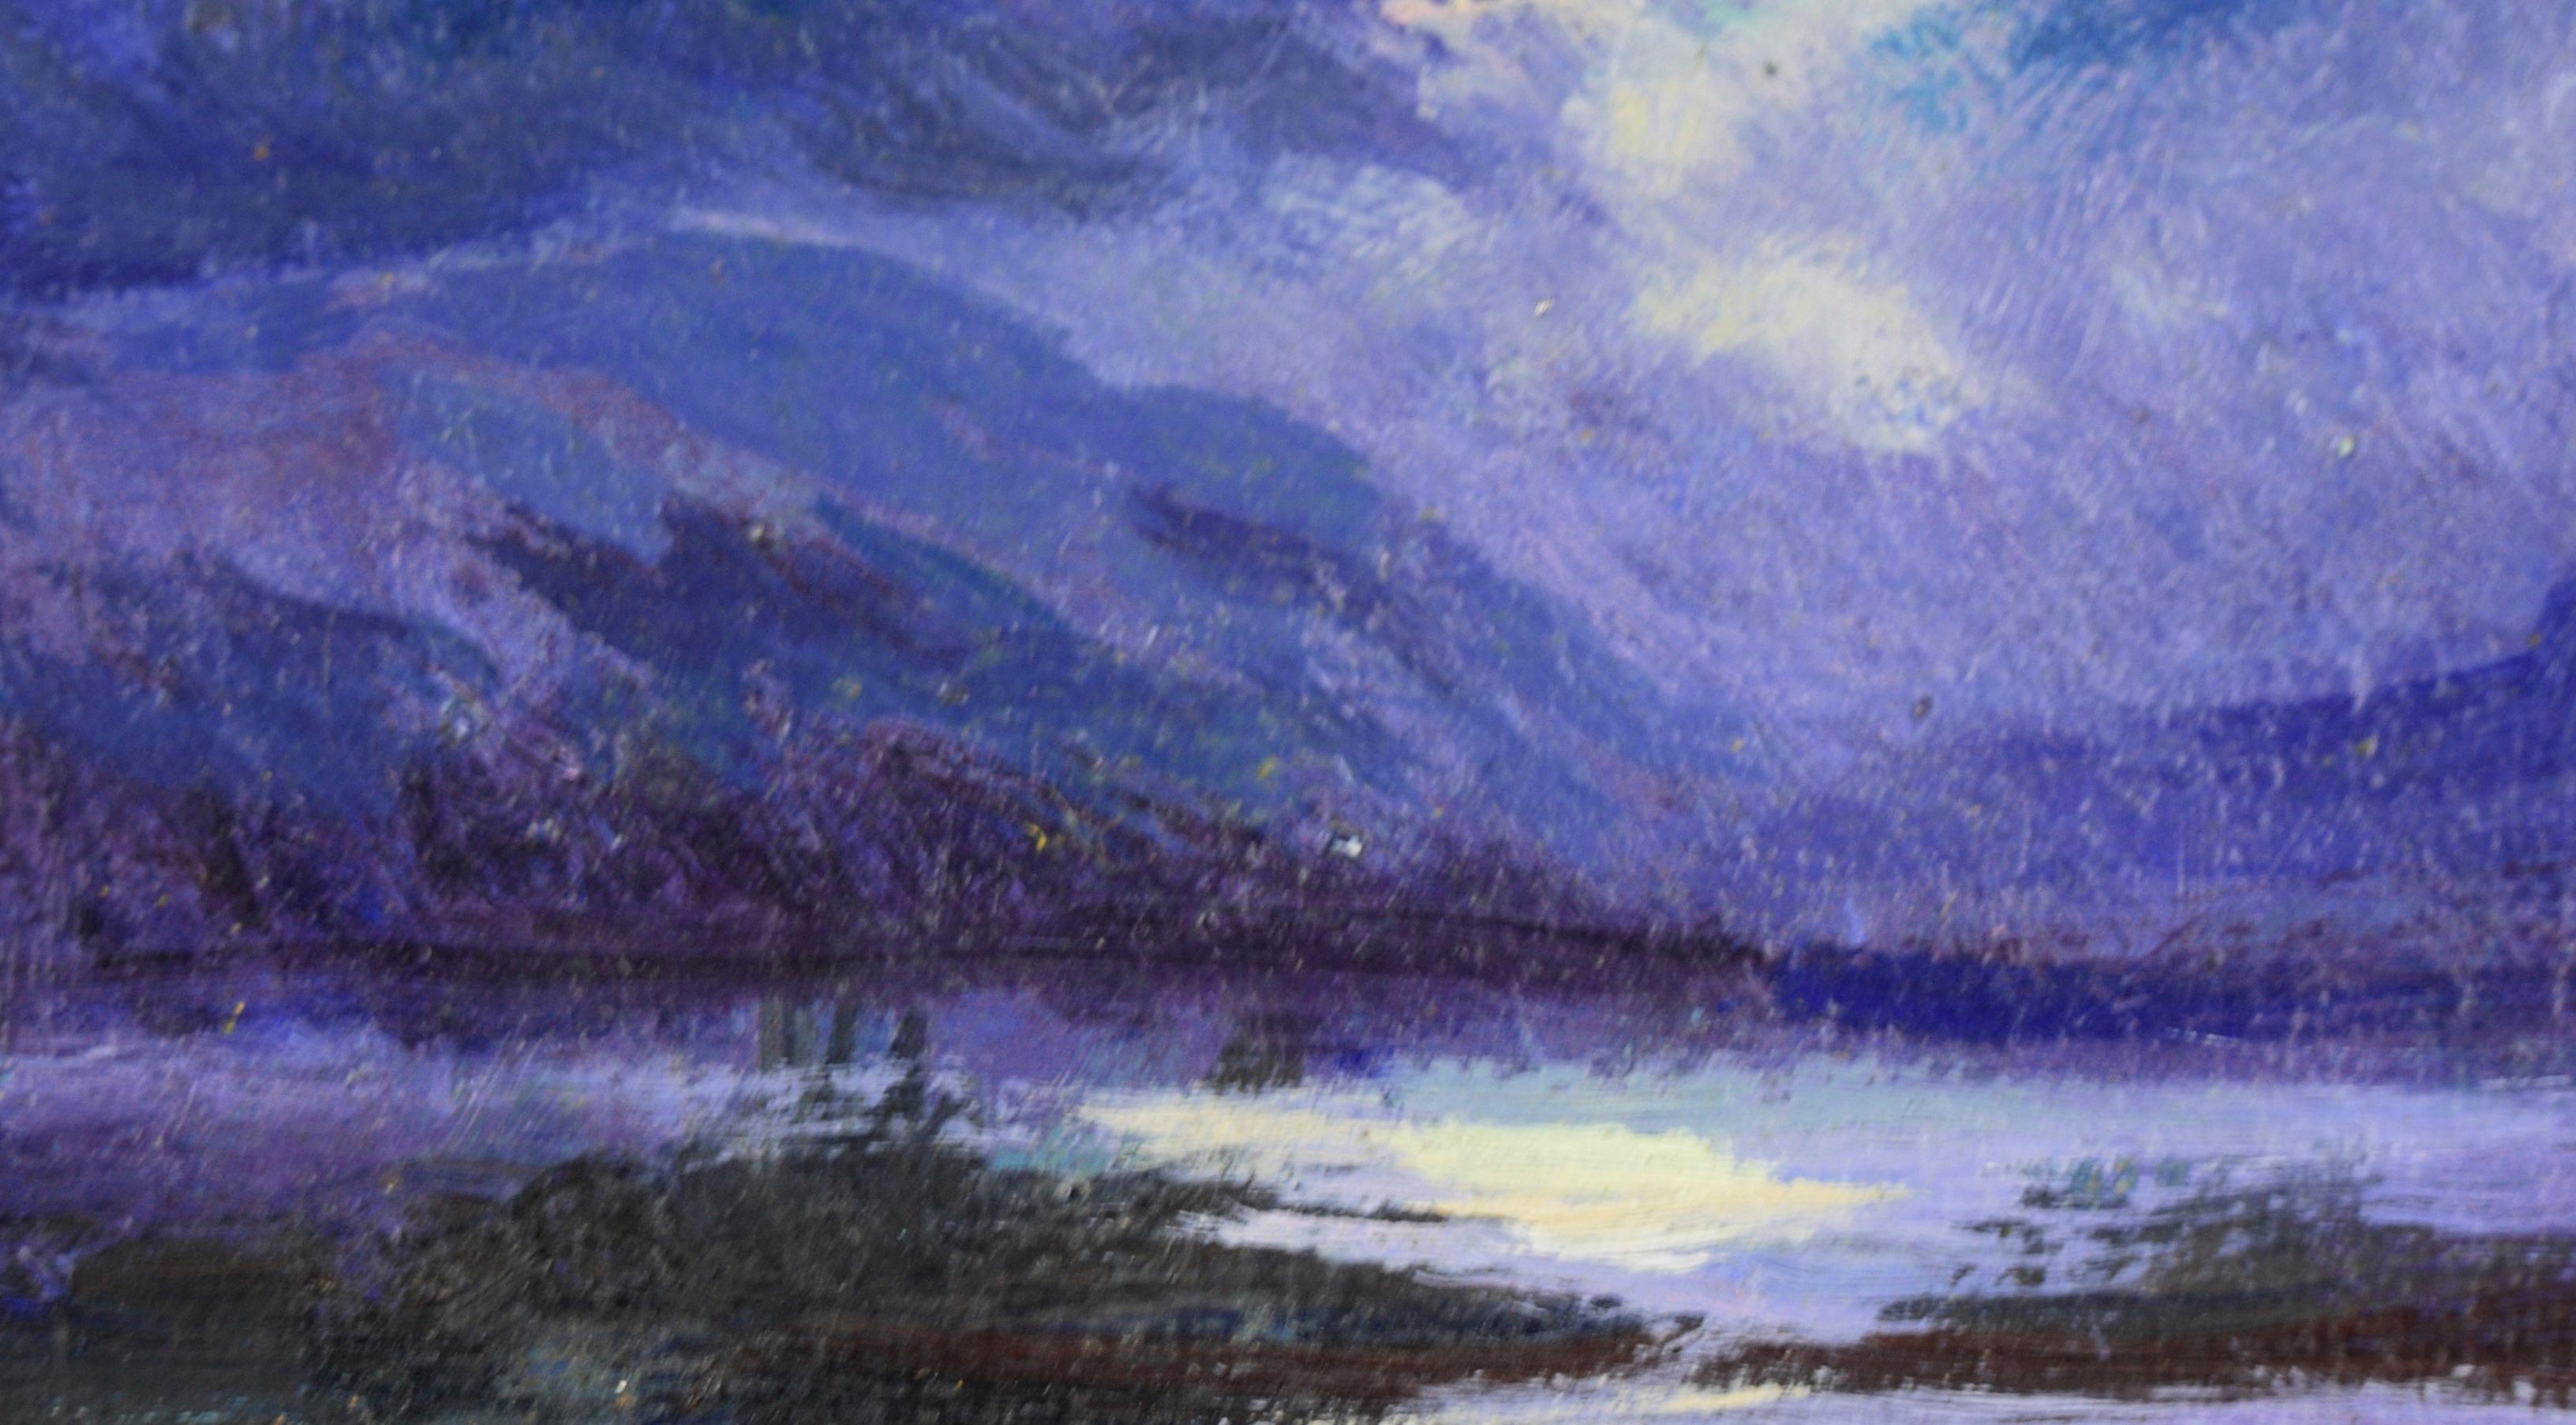 Dramatic seascape with a full moon by an unknown artist. The moon is partially obscured by clouds, and the light from the moon reflects in the water below. Purple-blue mountains frame the water on either side. Carmel or Pacific Grove Miniature